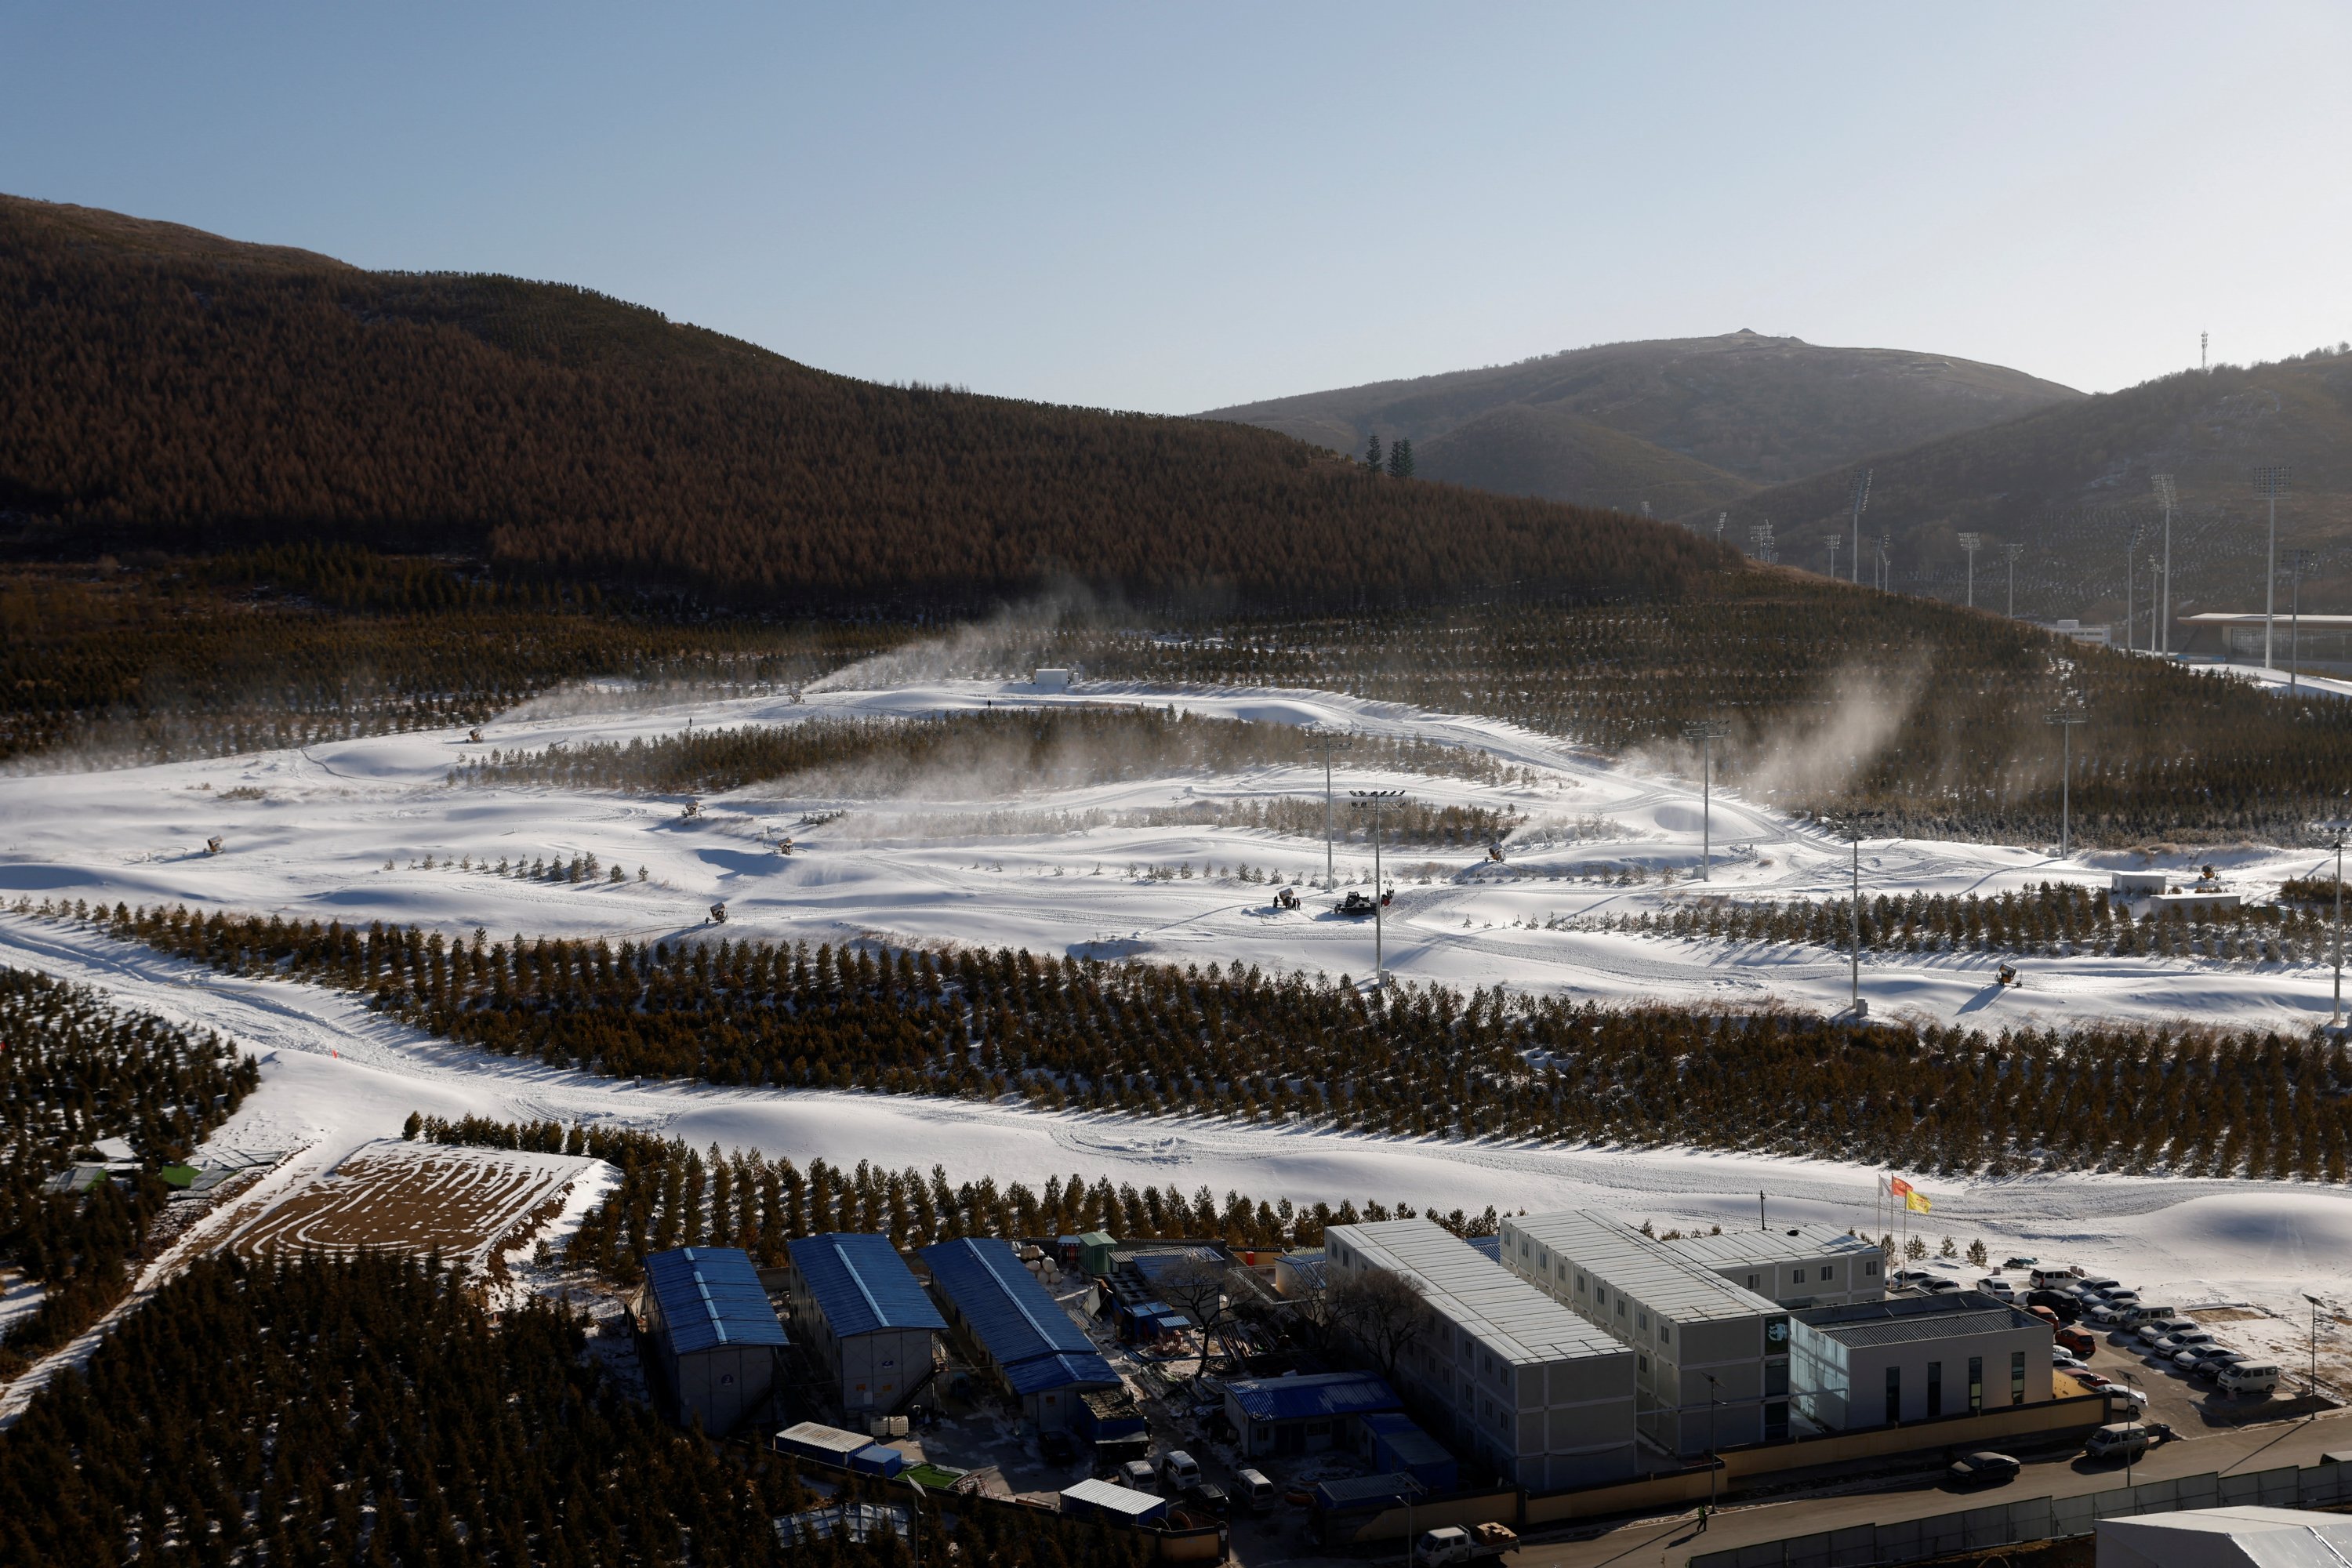 Trees and snow guns operating are seen on slopes near the National Ski Jumping Centre during a government-organized media tour to Beijing 2022 Winter Olympics venues, Zhangjiakou, China, Dec. 21, 2021. (Reuters Photo)